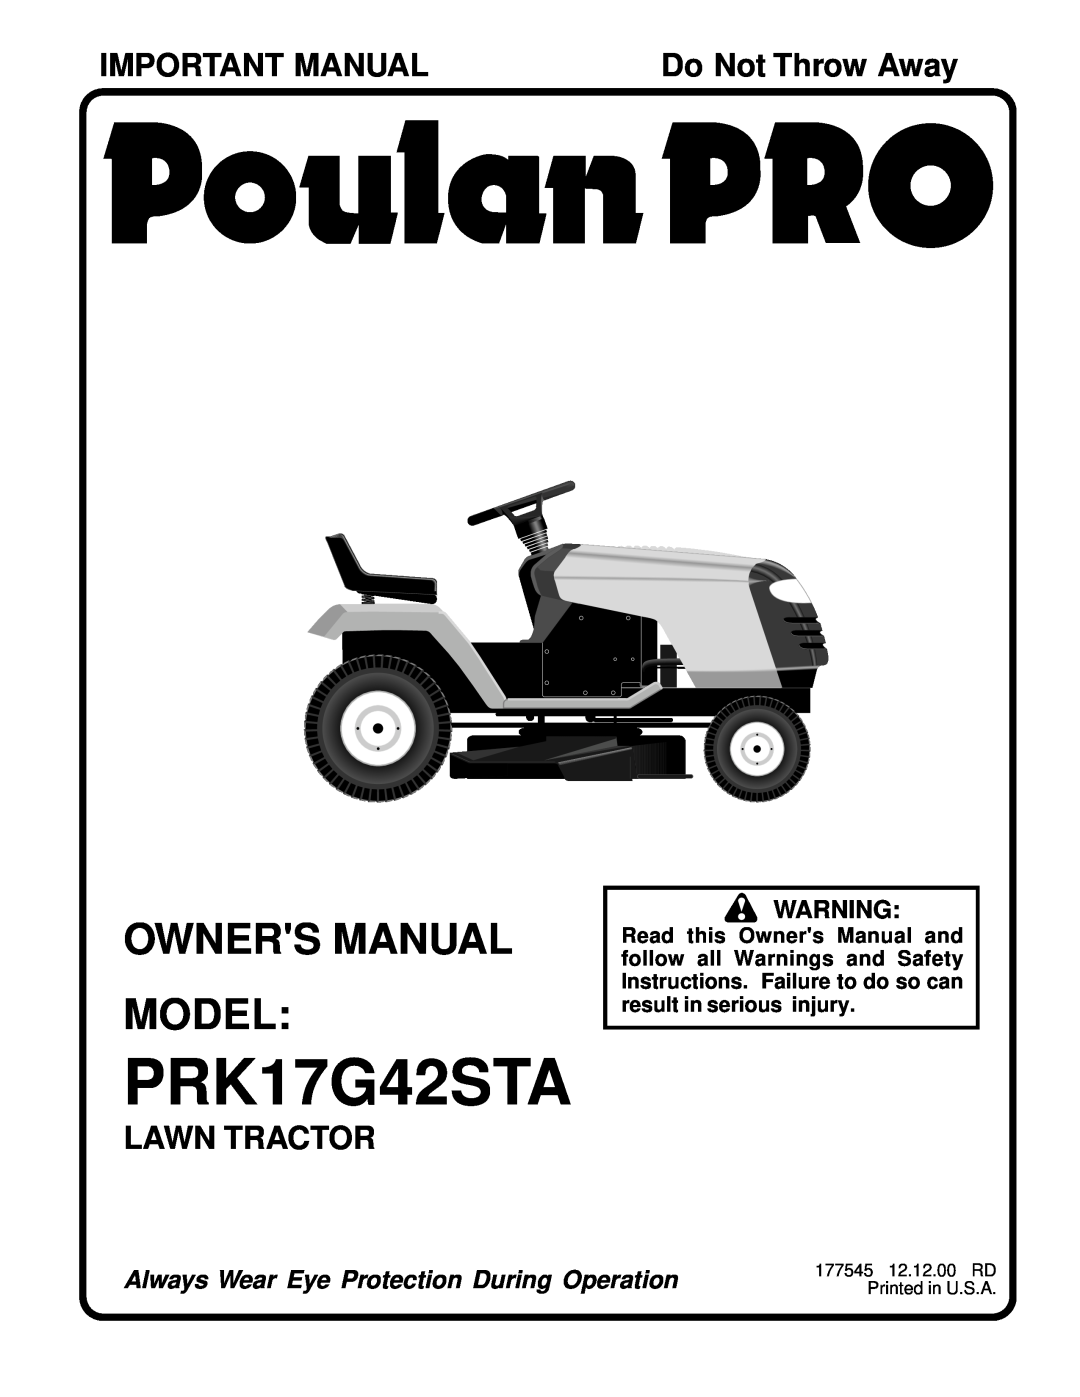 Poulan 177545 owner manual Important Manual, Lawn Tractor, Always Wear Eye Protection During Operation, PRK17G42STA 